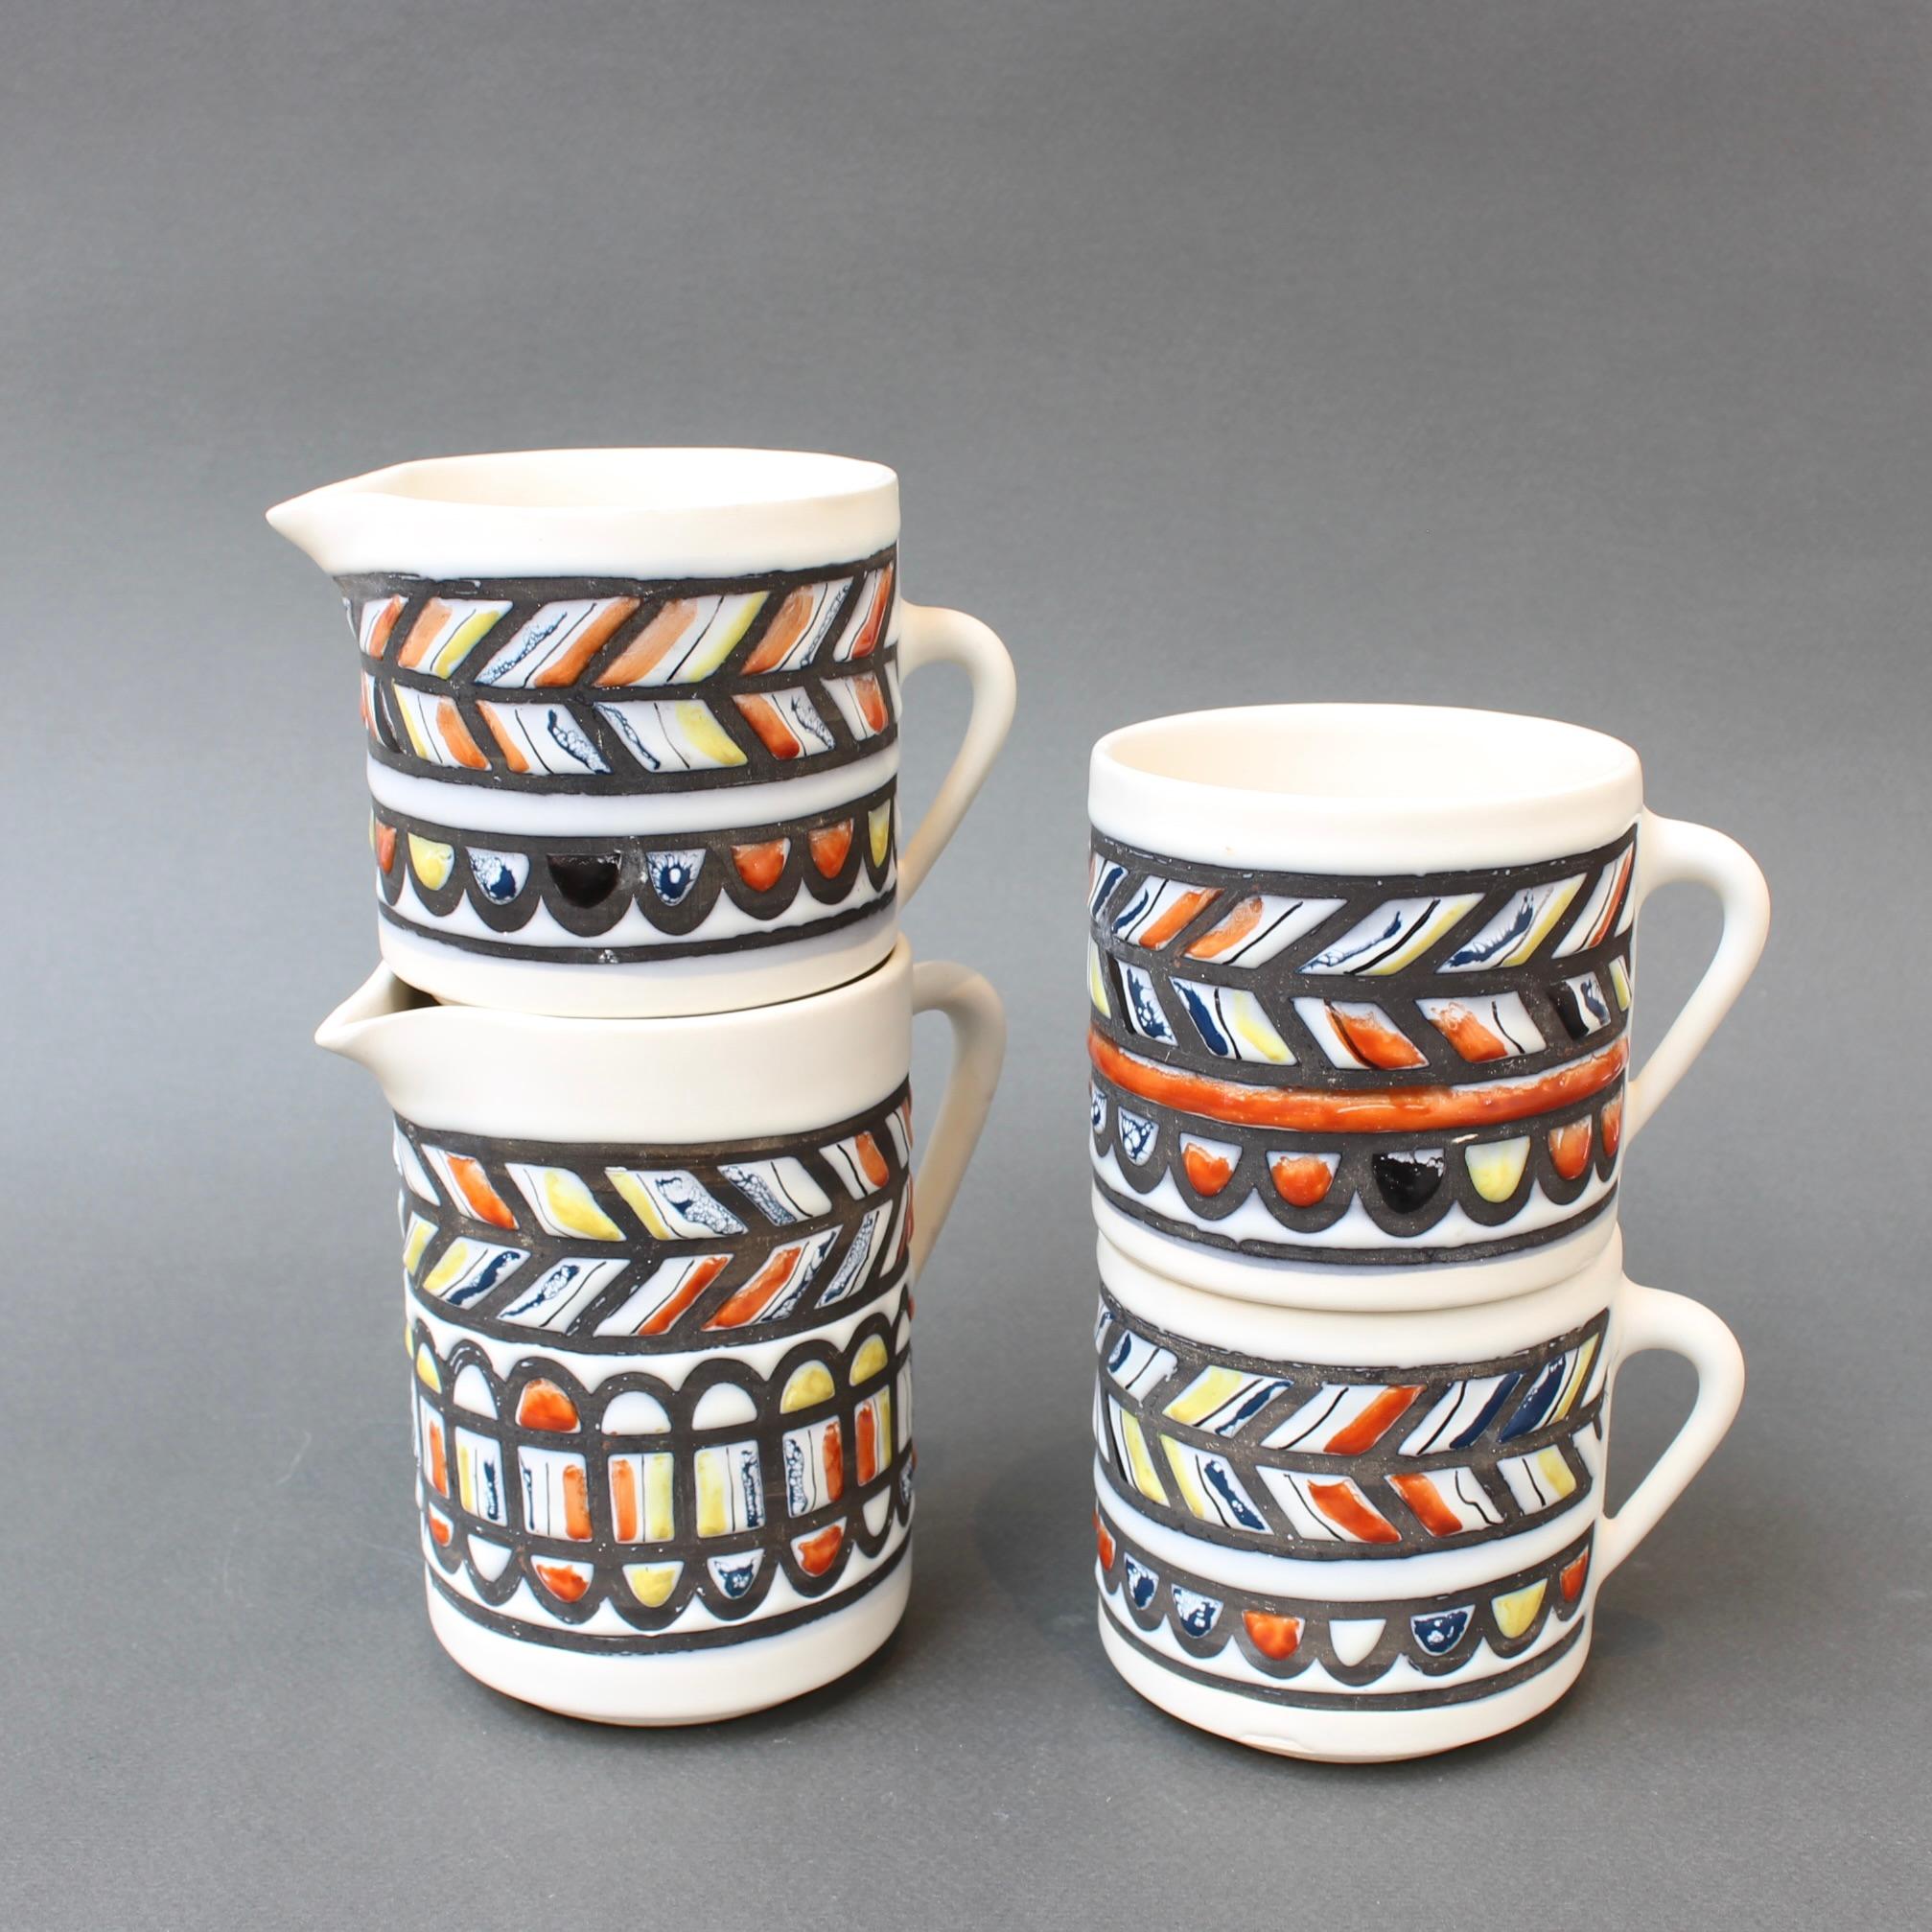 Vintage French Ceramic Set of Vessels by Roger Capron (circa 1960s) For Sale 8